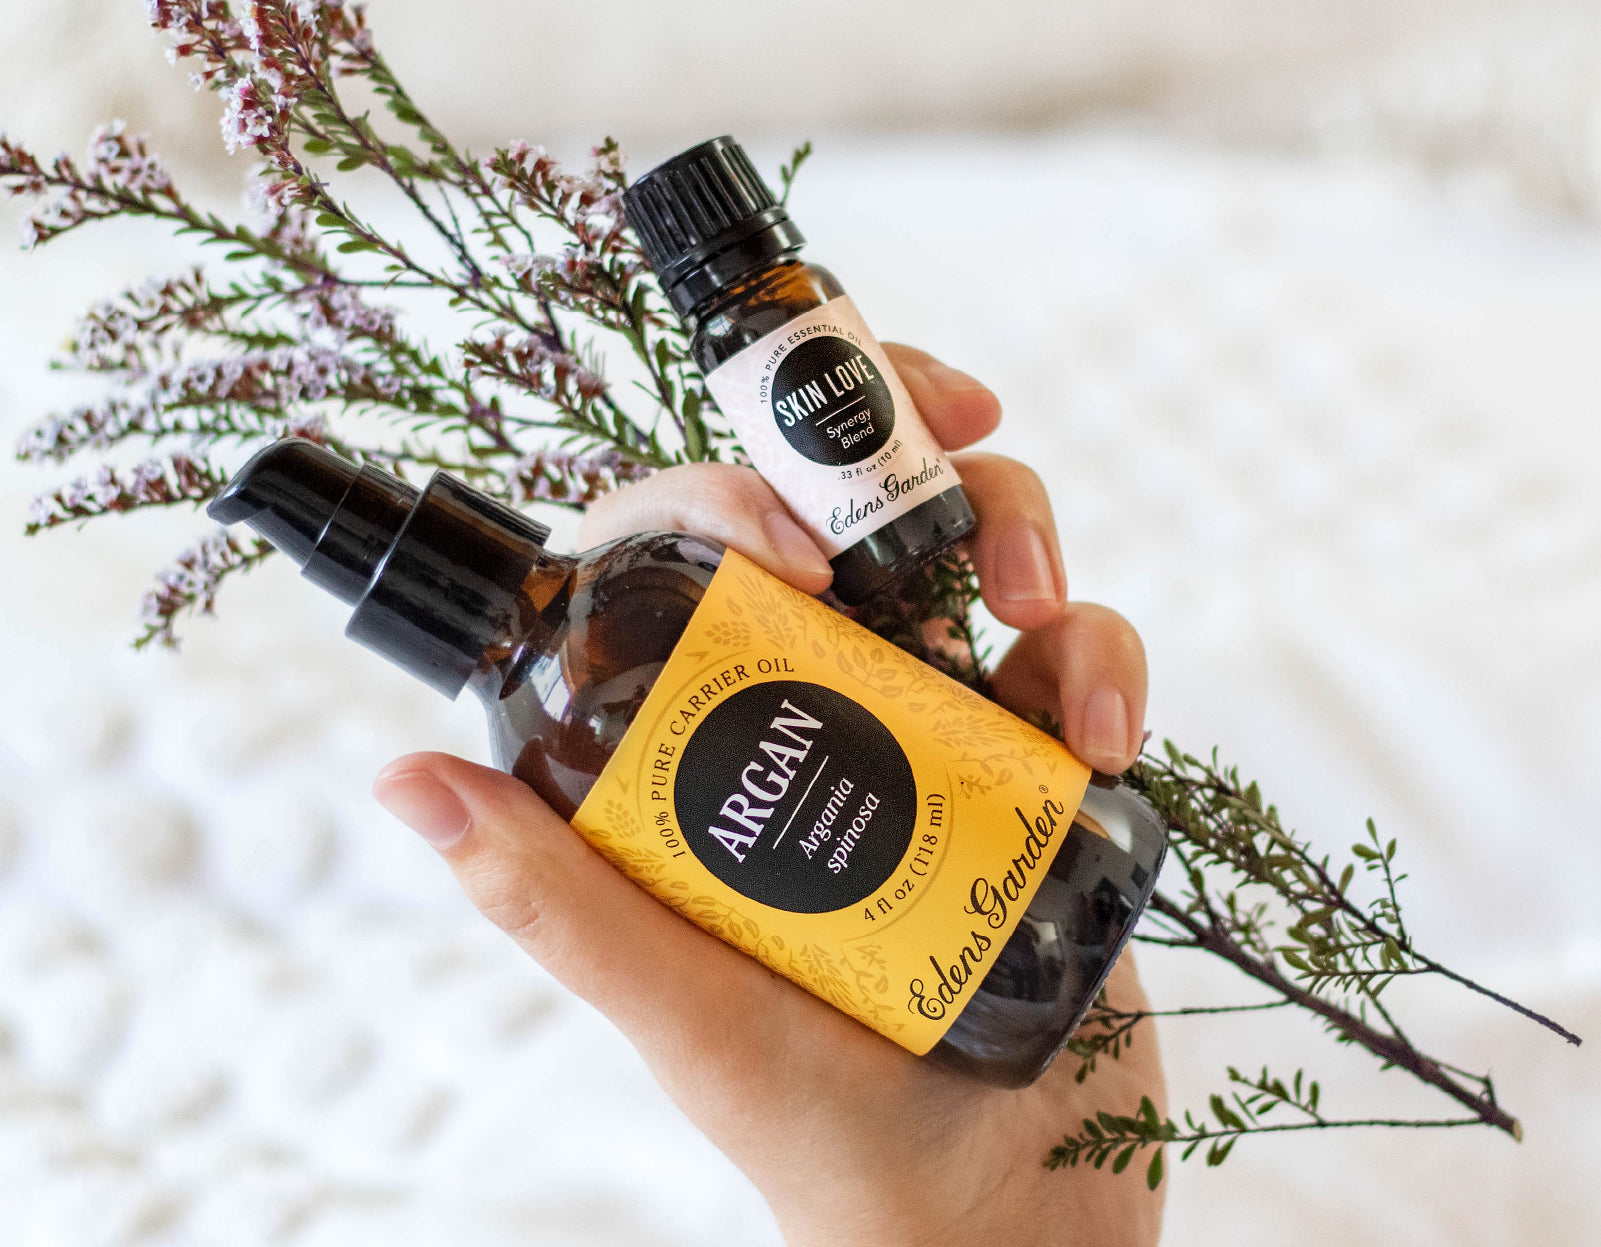 Find Comfort with the Top 5 Vanilla Essential Oils